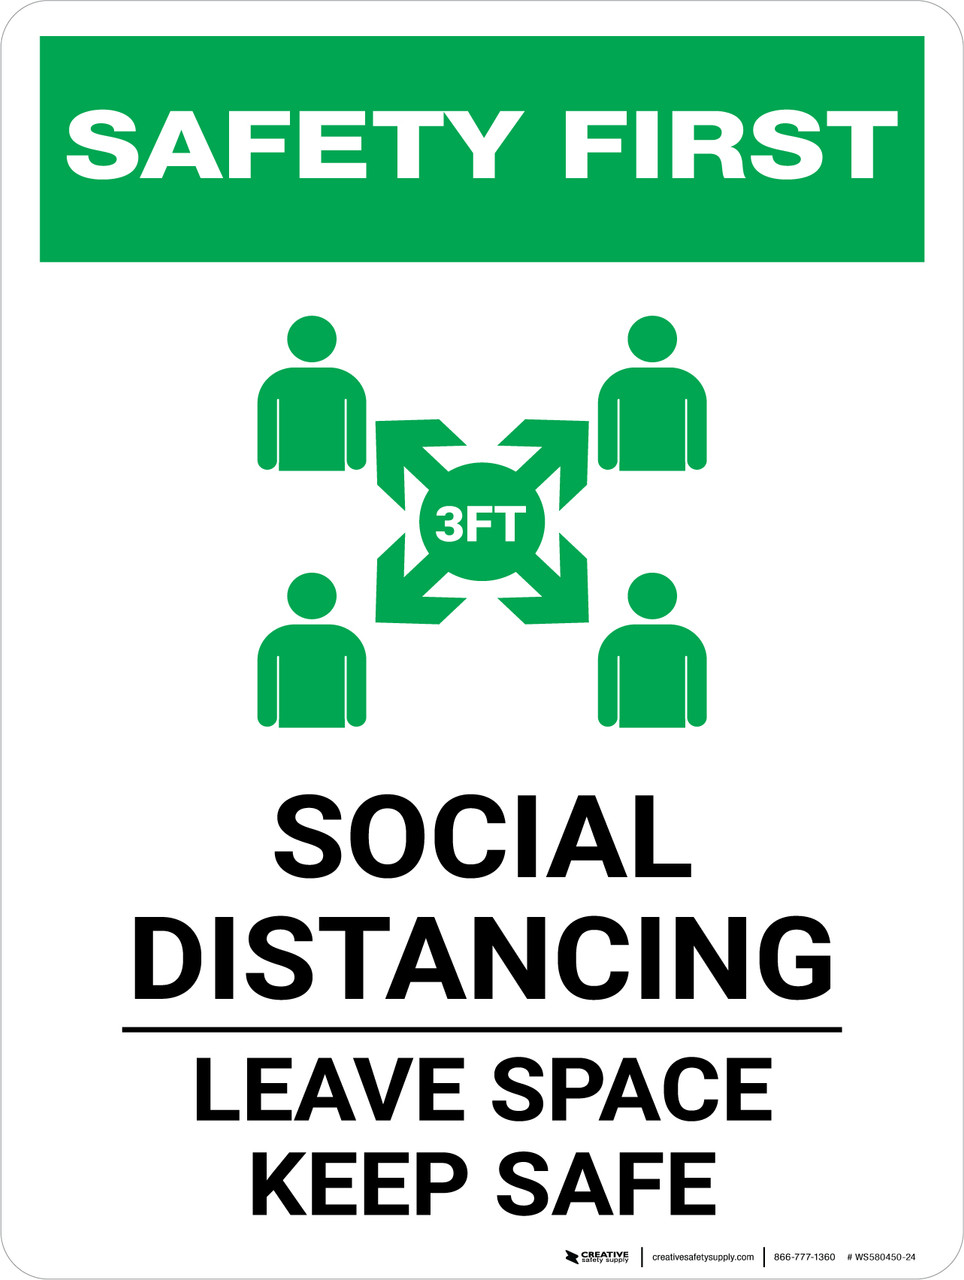 Safety First: Social Distancing Leave Space Keep Safe with 3ft Icon